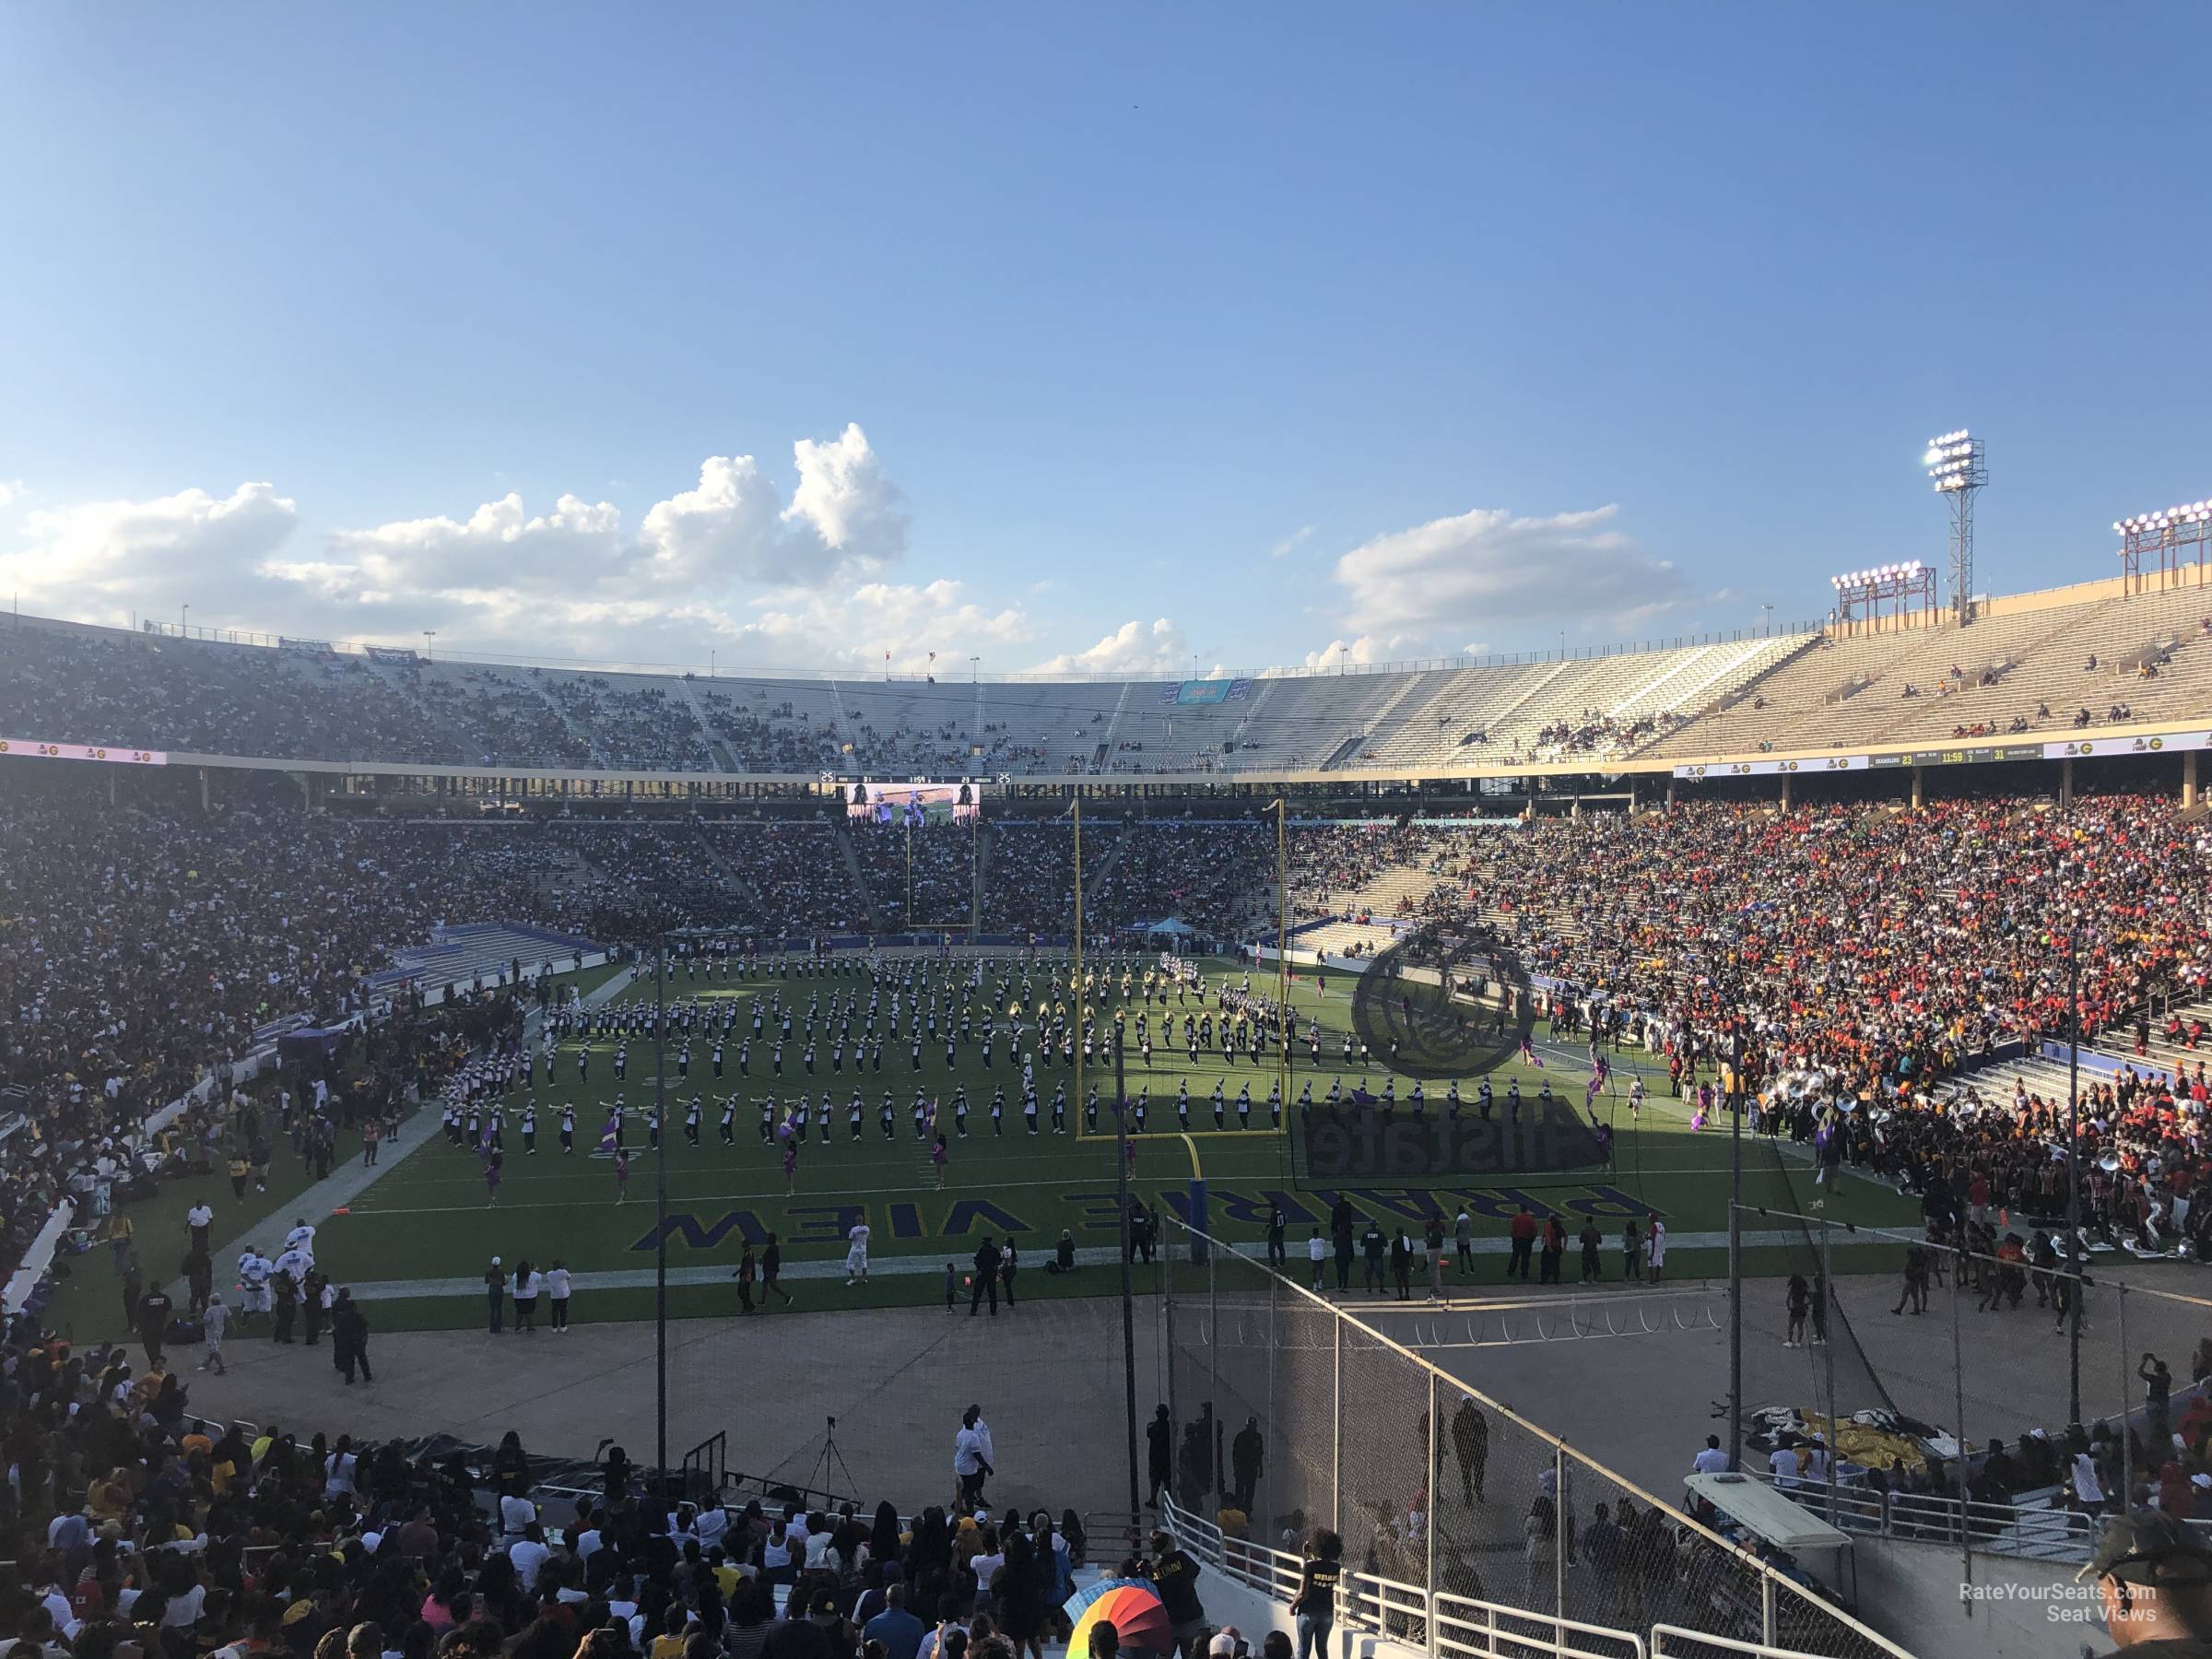 section 34, row 40 seat view  - cotton bowl